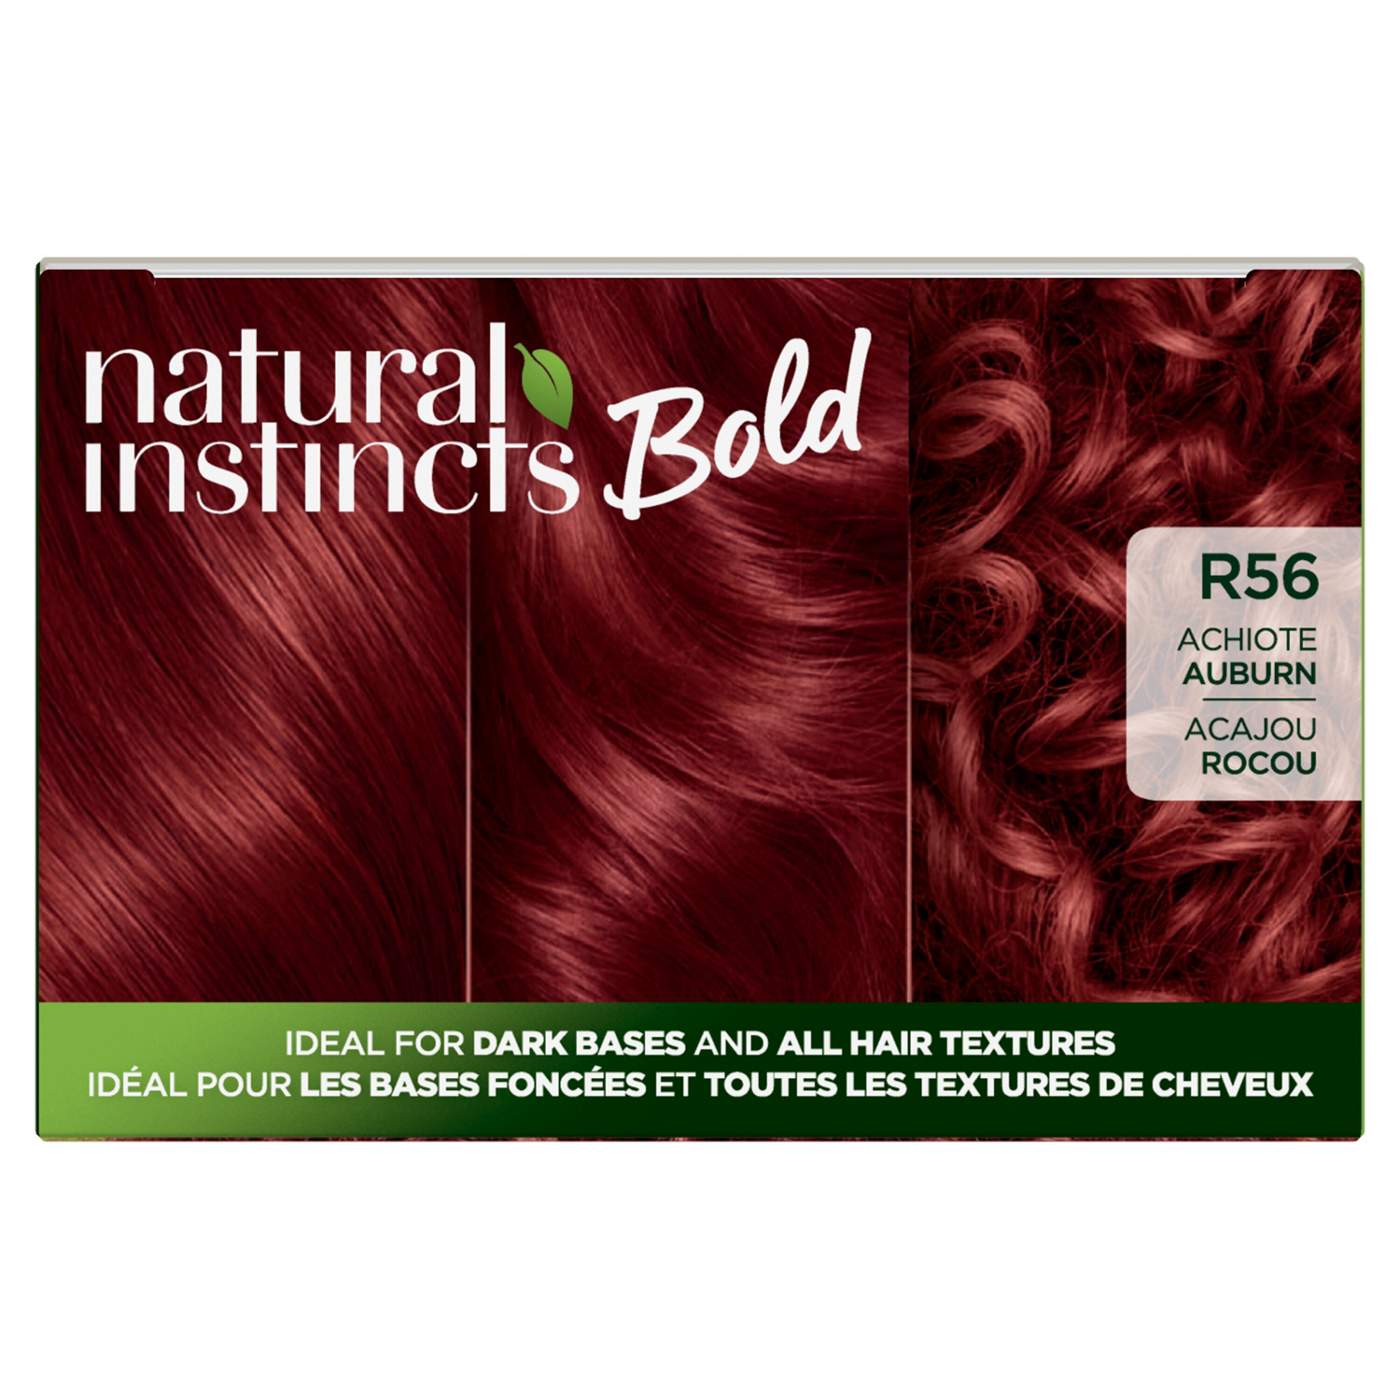 Clairol Natural Instincts Bold Permanent Hair Color - R56 Achiote Auburn ; image 4 of 6